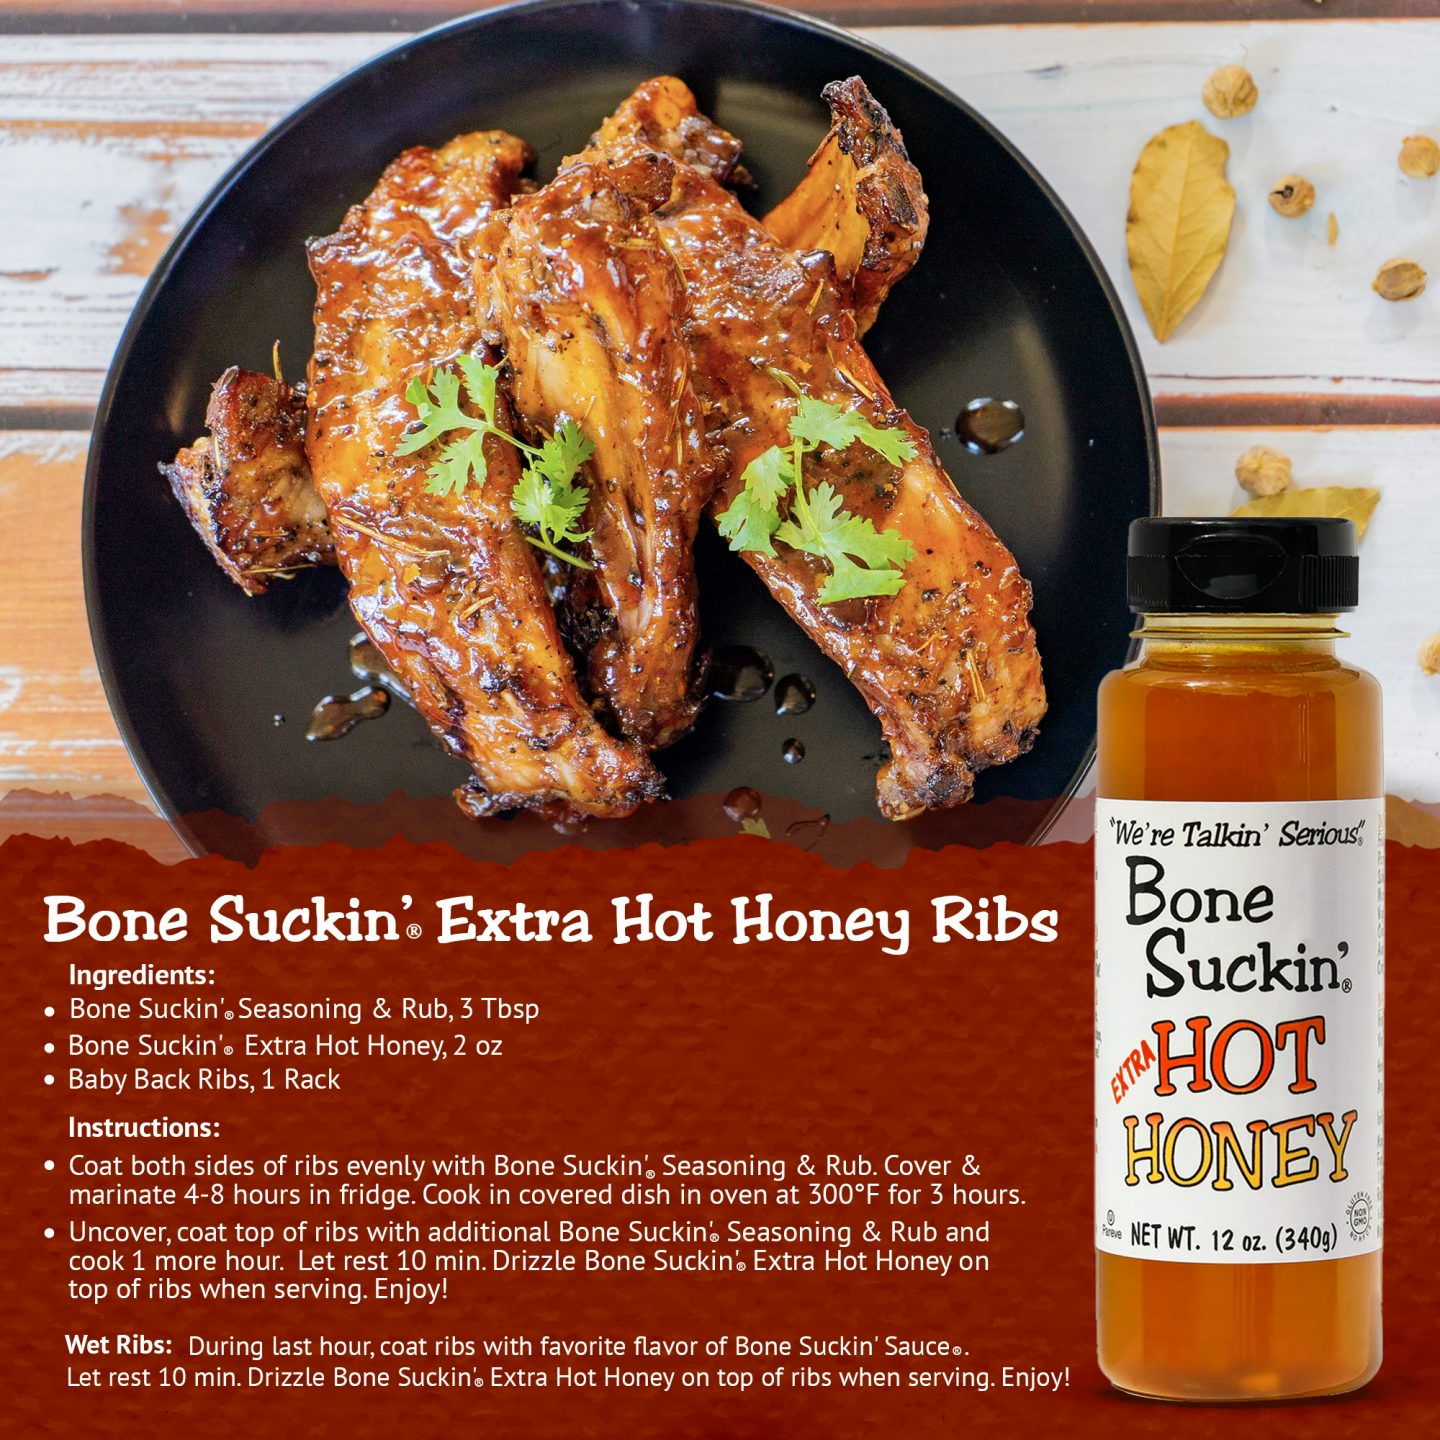 Bone Suckin' Hot Honey Ribs. Ingredients: Bone Suckin' Seasoning & Rub, 3 tbsp. Bone Suckin' Hot Honey, 2 oz. Baby back ribs, 1 rack. Instructions: Coat both sides of ribs with Bone Suckin' Seasoning & Rub. Cover & marinate 4-8 hours in fridge. Cook in covered dish in oven at 300 for 3 hours. Uncover, coat top of ribs with additional Bone Suckin' Seasoning & Rub. Cook 1 more hour. Let rest 10 min. Drizzle Bone Suckin' Hot Honey on top of ribs when serving. Enjoy!